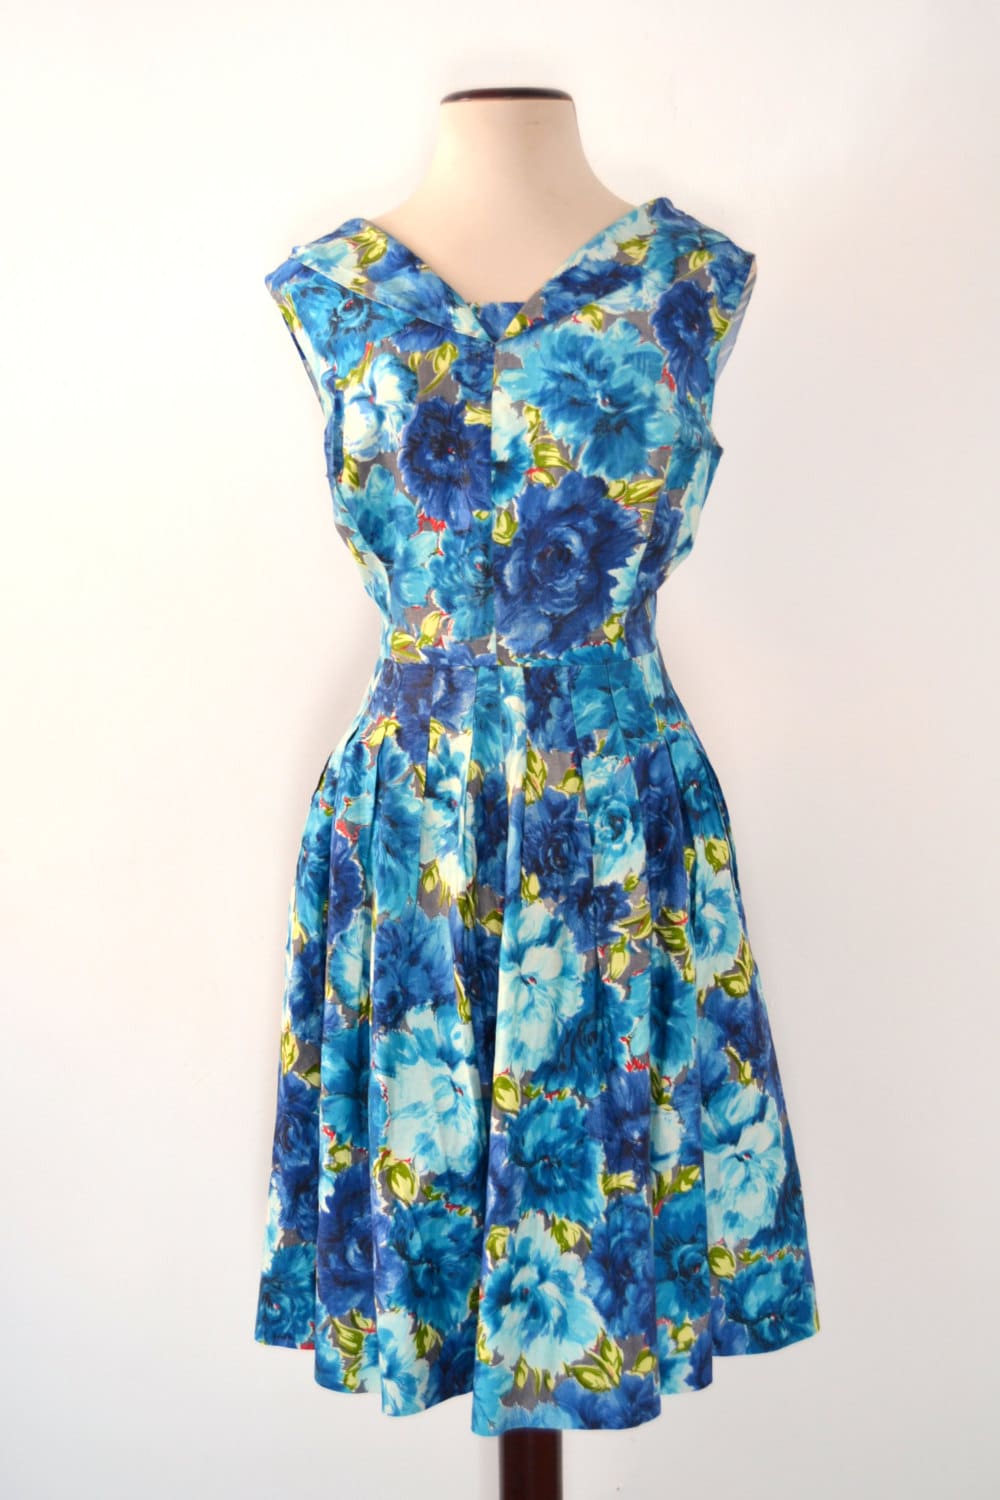 Classic 1950s floral Printed Cotton DRESS. Hand Made Timeless